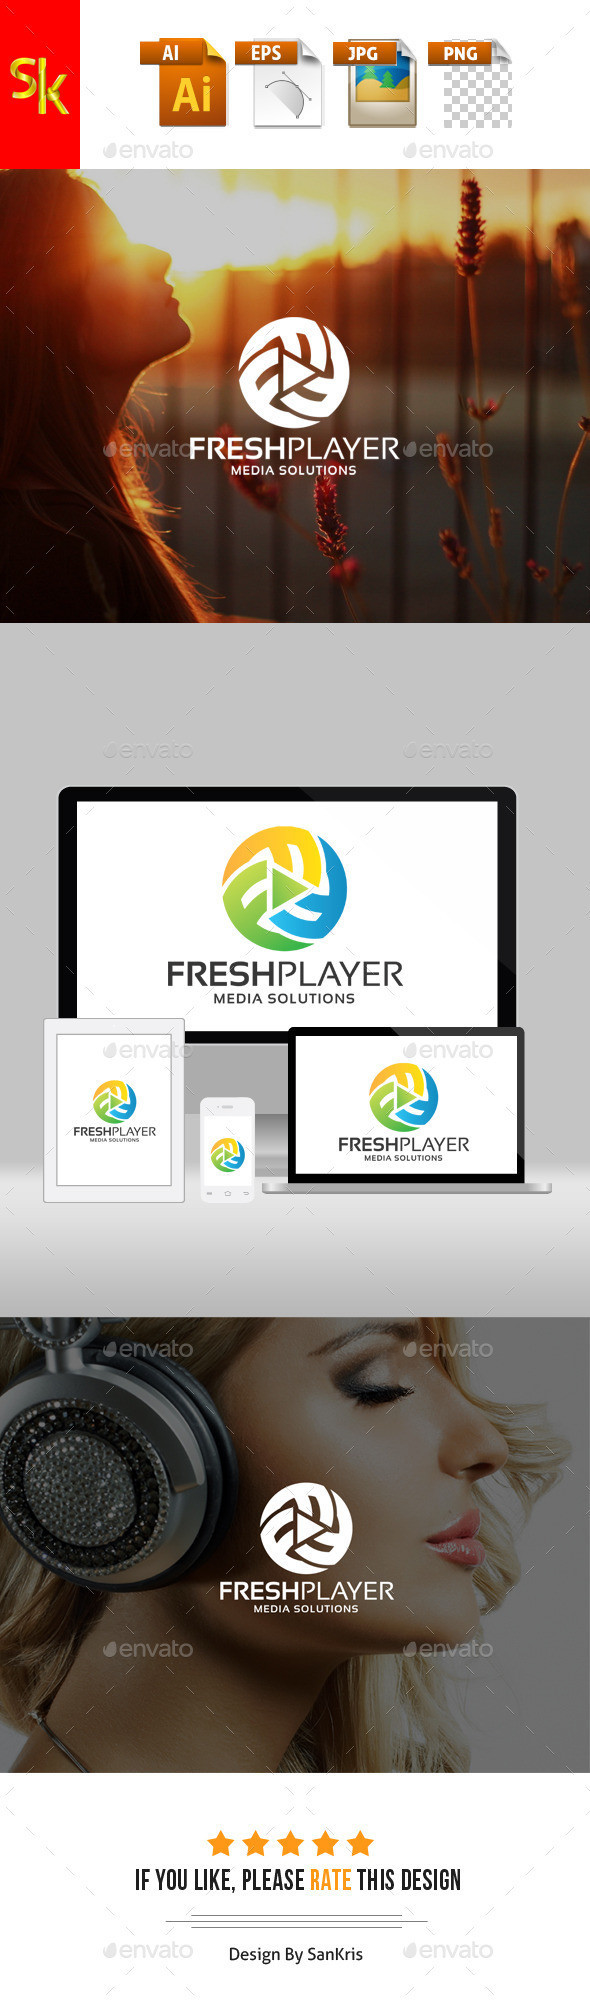 Fresh media player preview